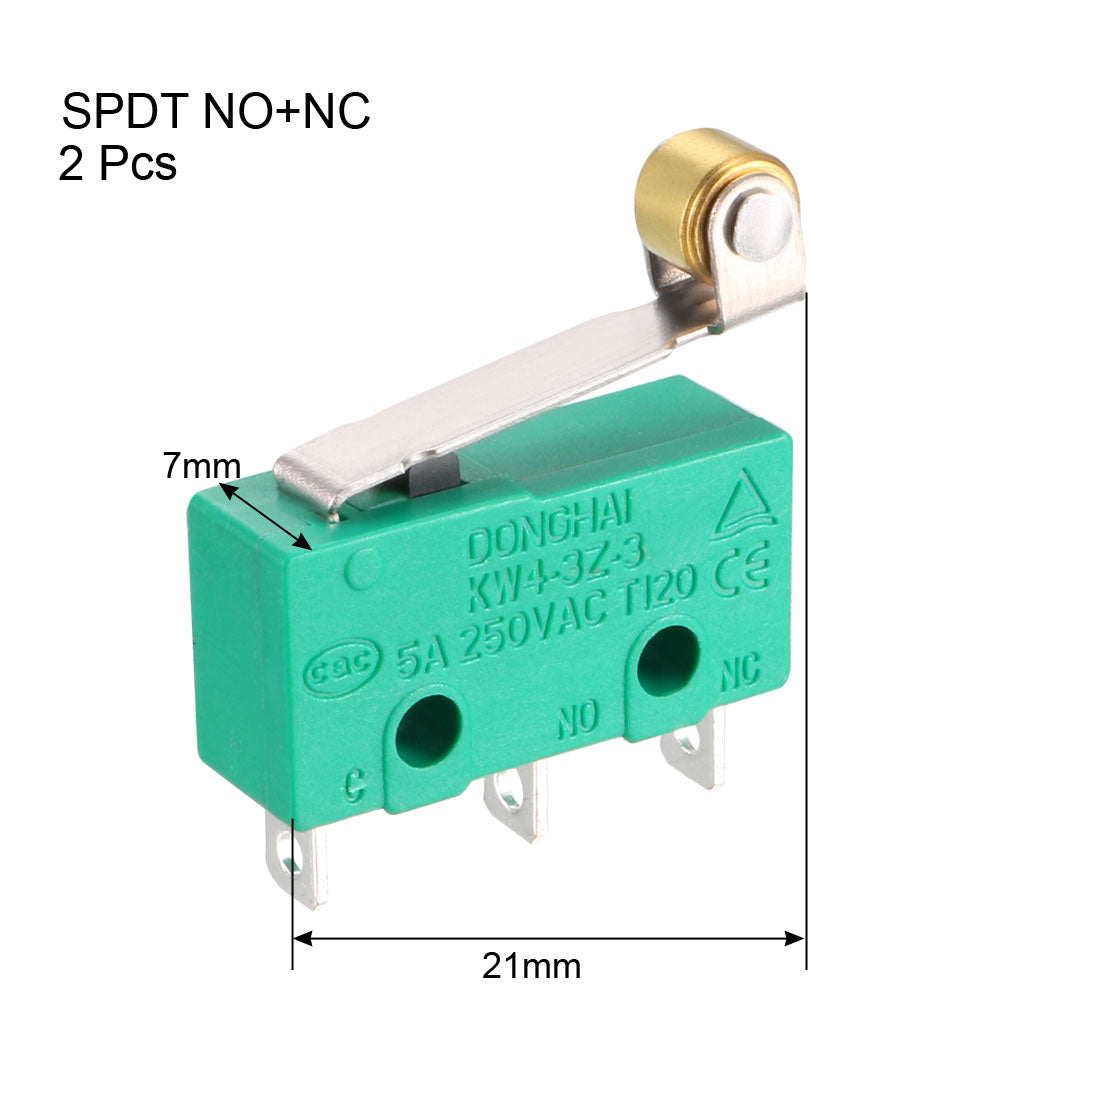 uxcell Uxcell 2PCS KW4-3Z-3 Micro Limit Switch SPDT NO NC 3 Terminals Momentary Hinge Roller Lever Green